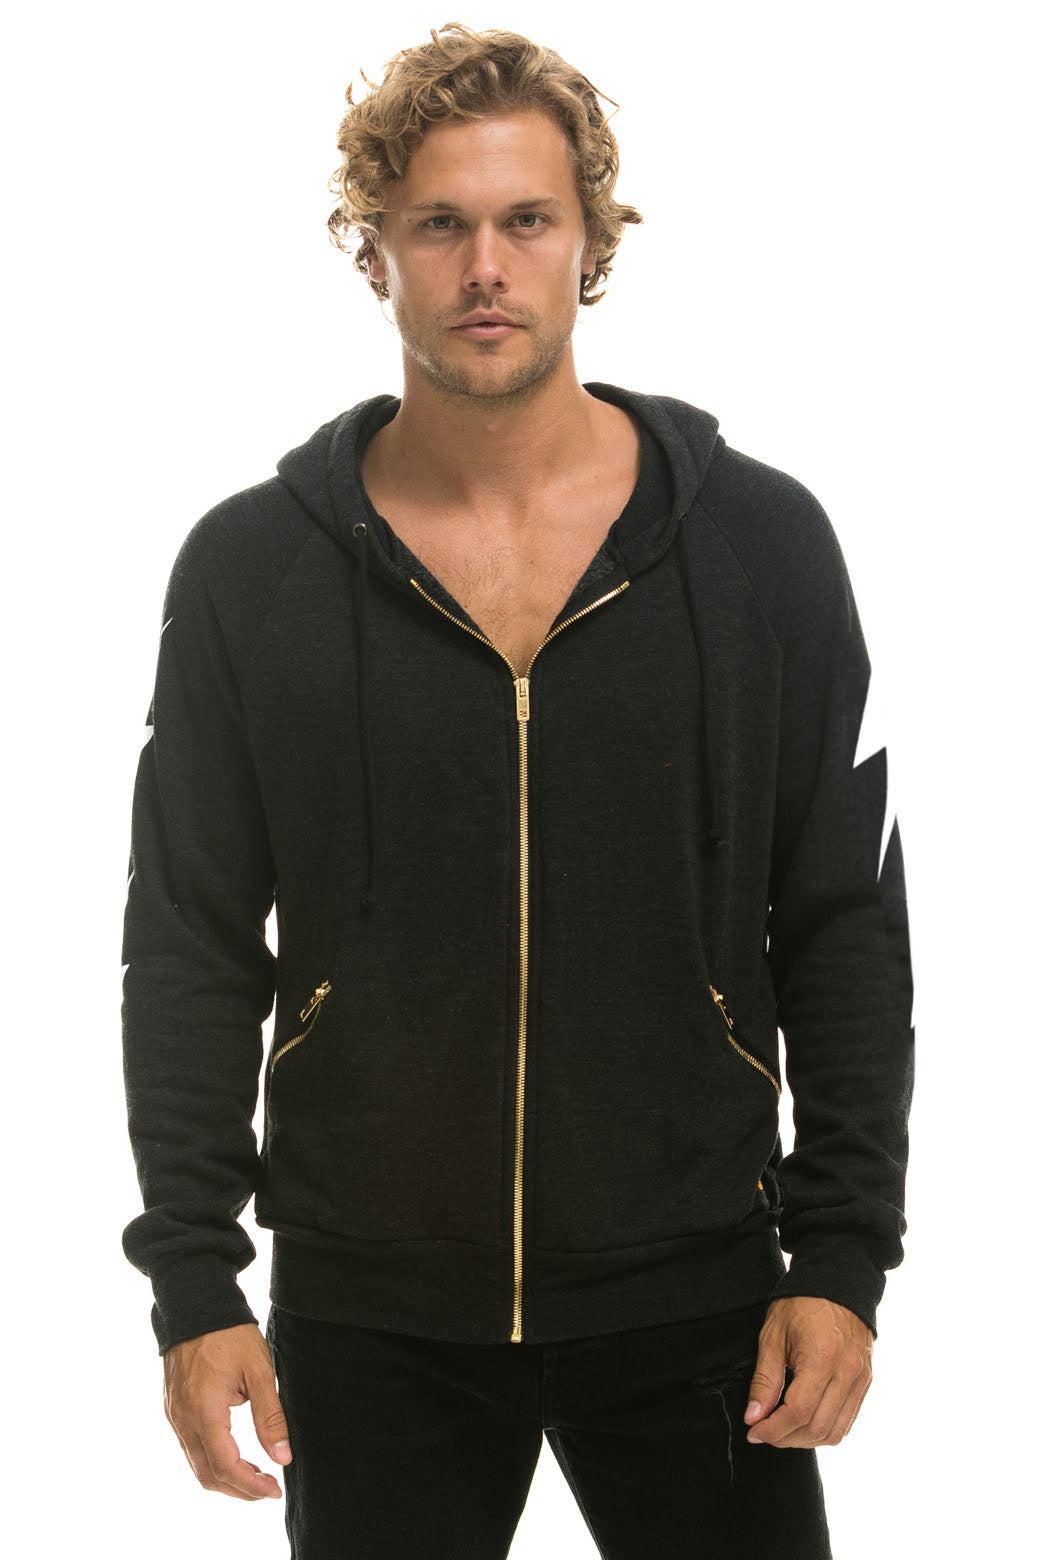 BOLT 4 ZIP HOODIE RELAXED WITH POCKETS - BLACK